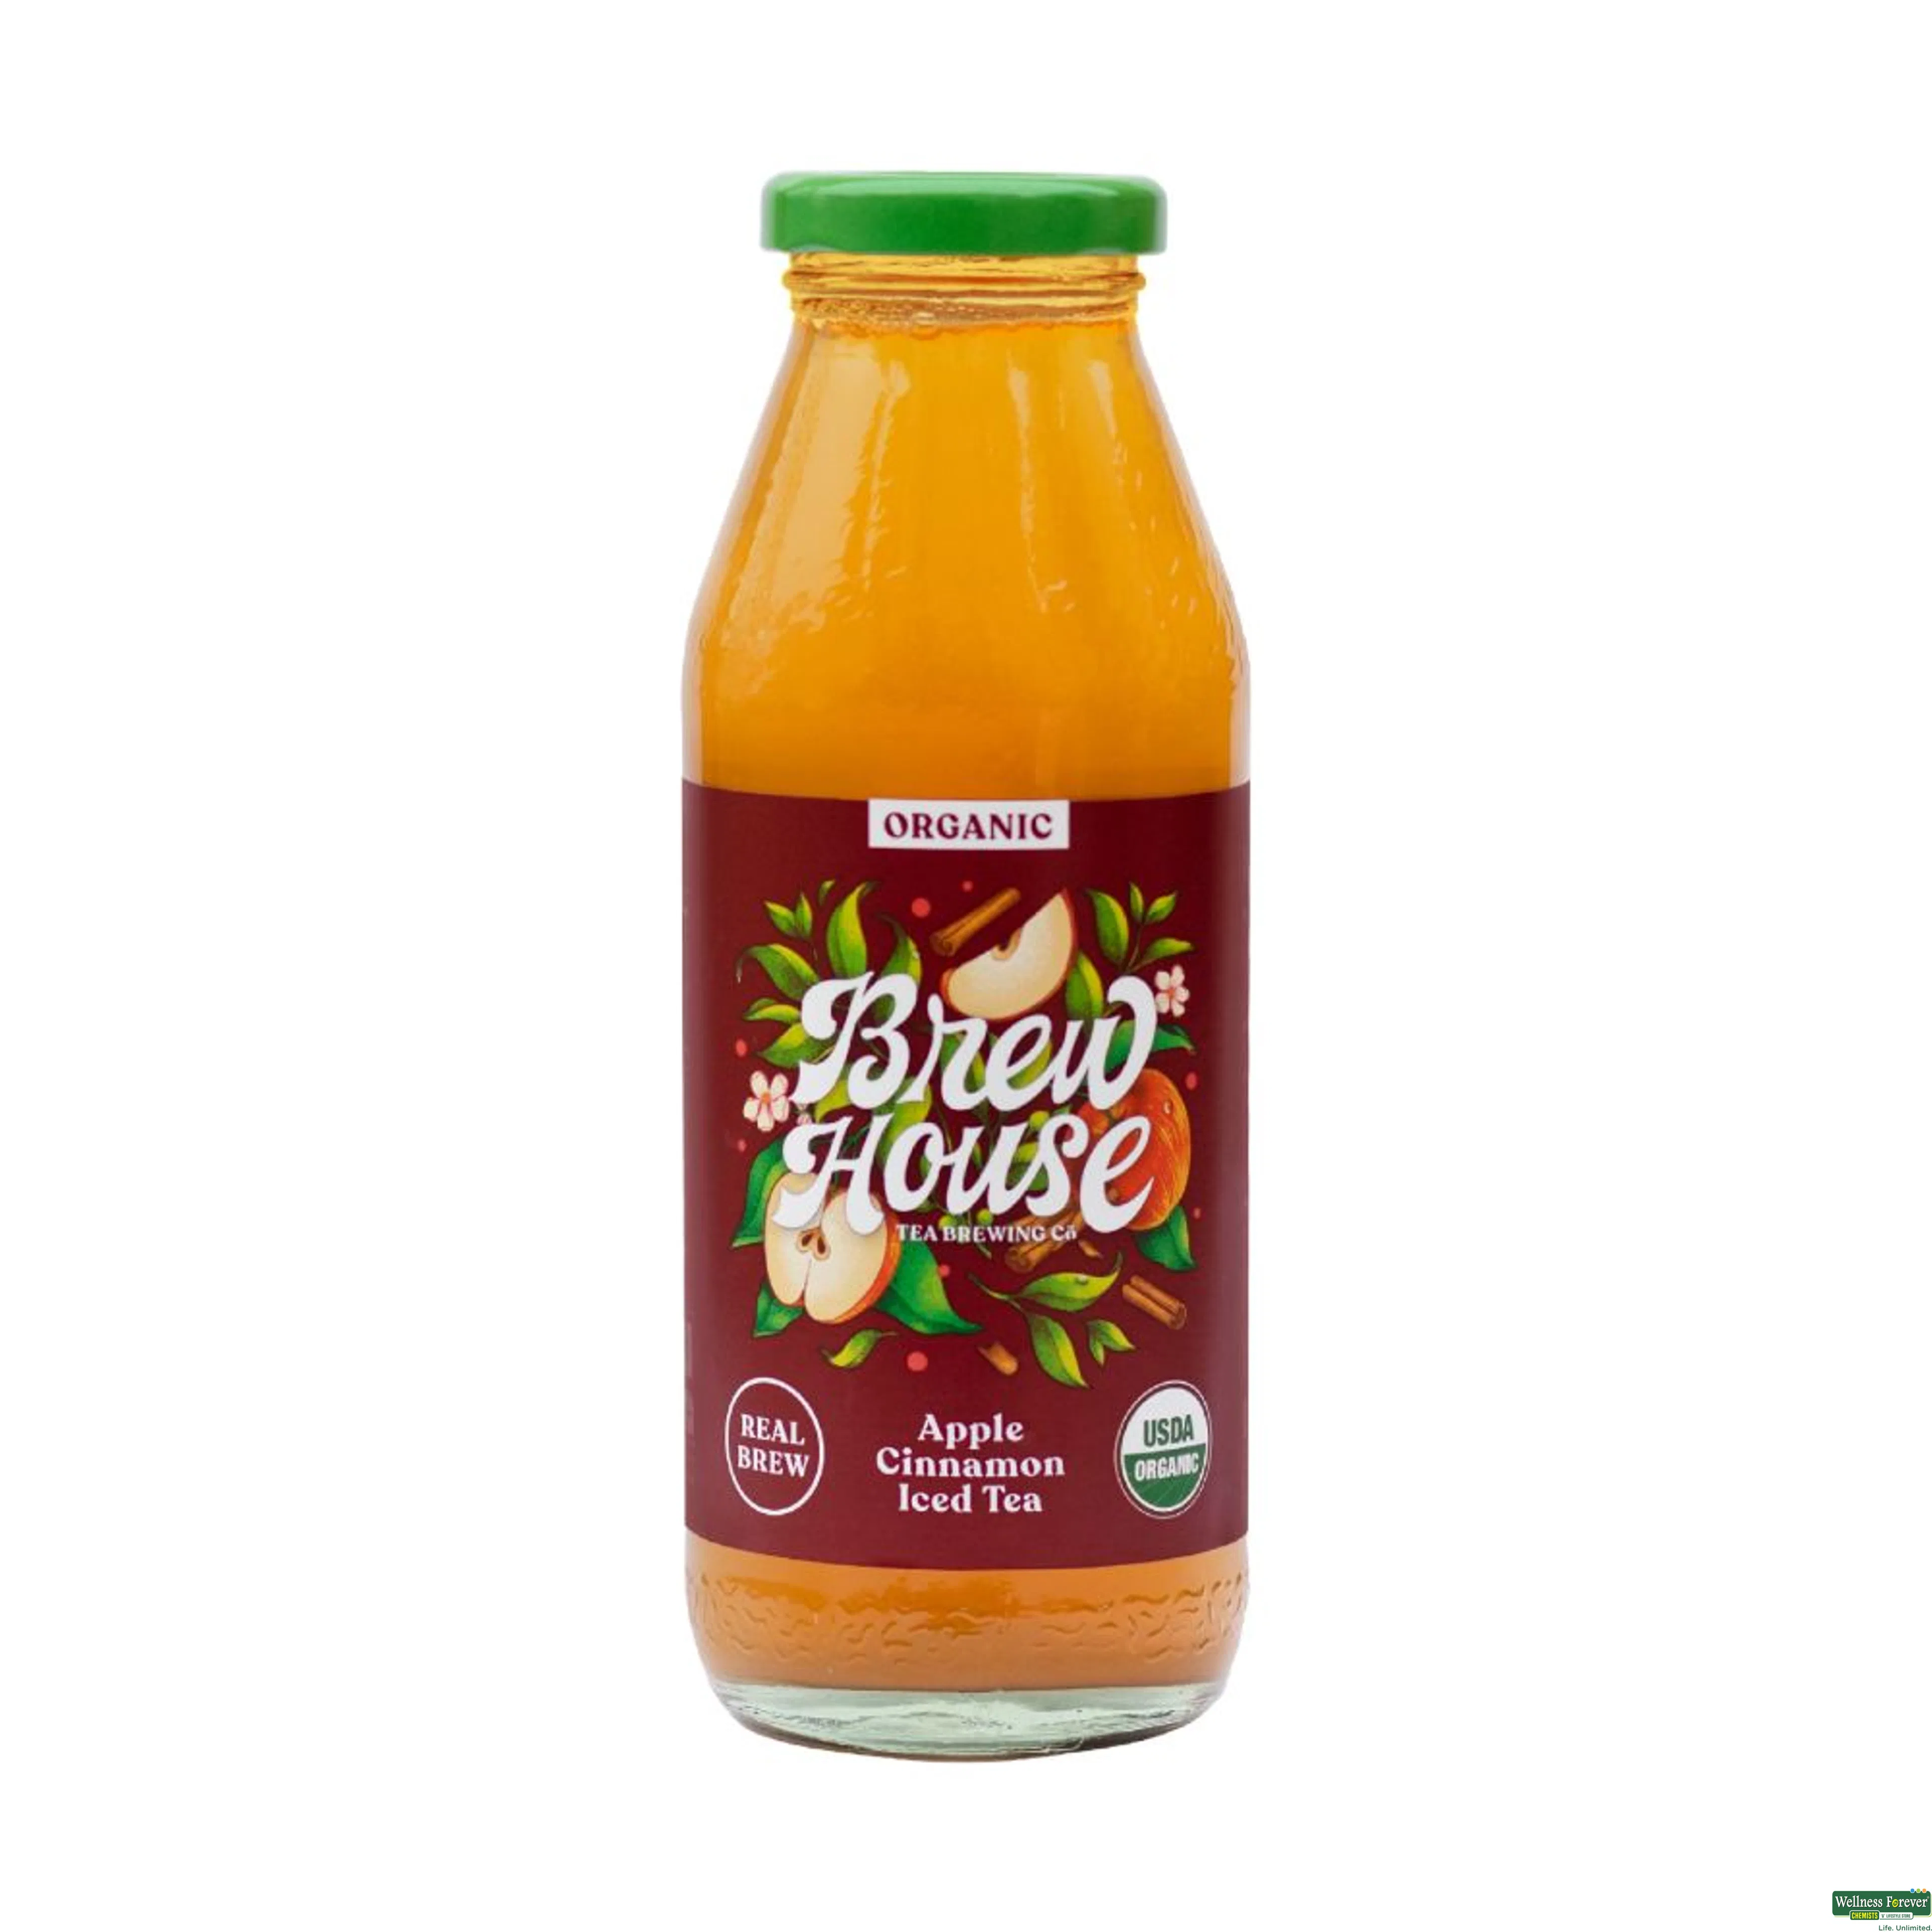 Buy Brewhouse Mojito Lime Ice Tea, 350 ml Online at Best Price